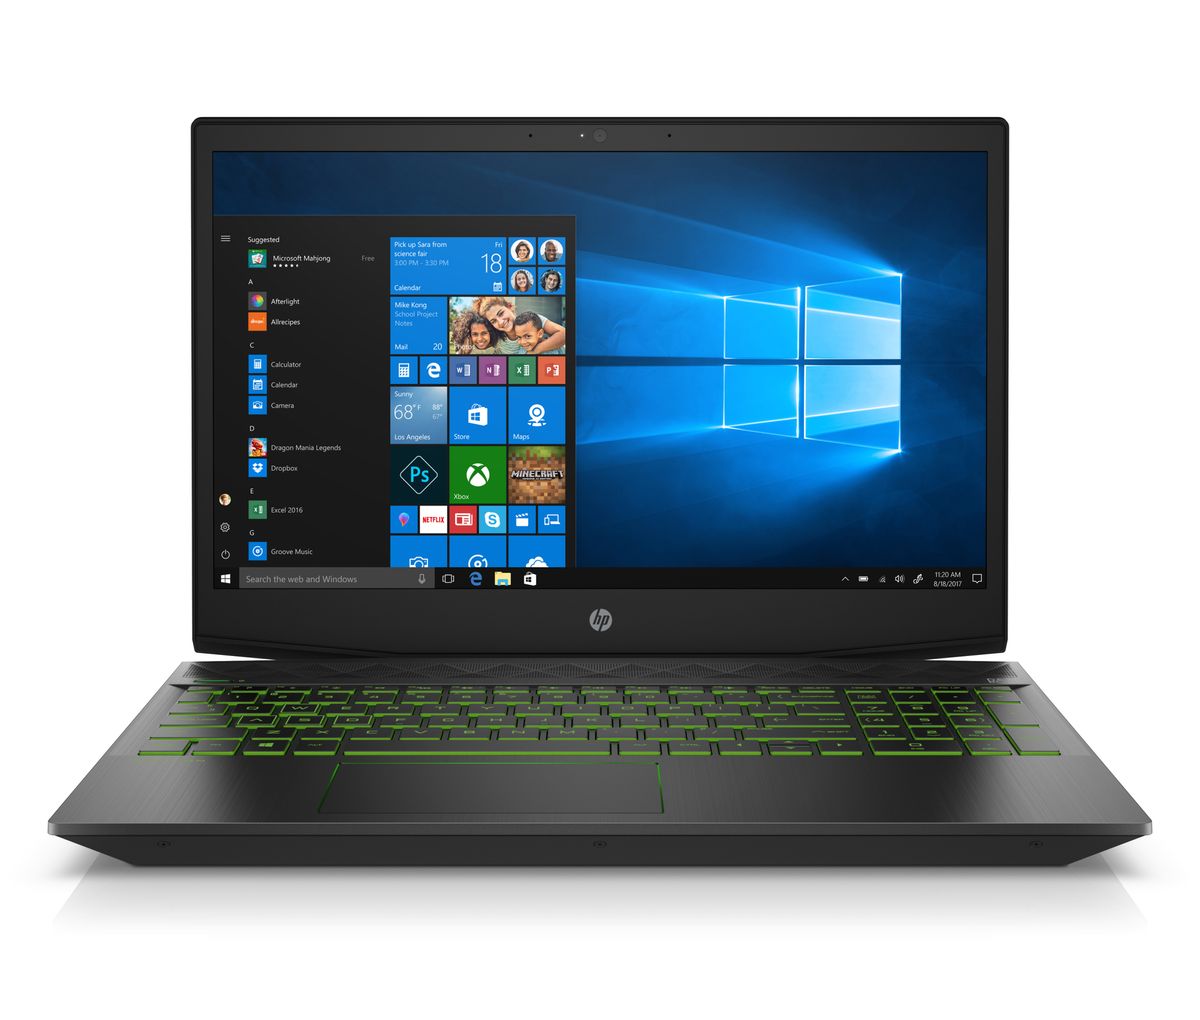 HP debuts Pavilion Gaming Laptops with many choices for mainstream